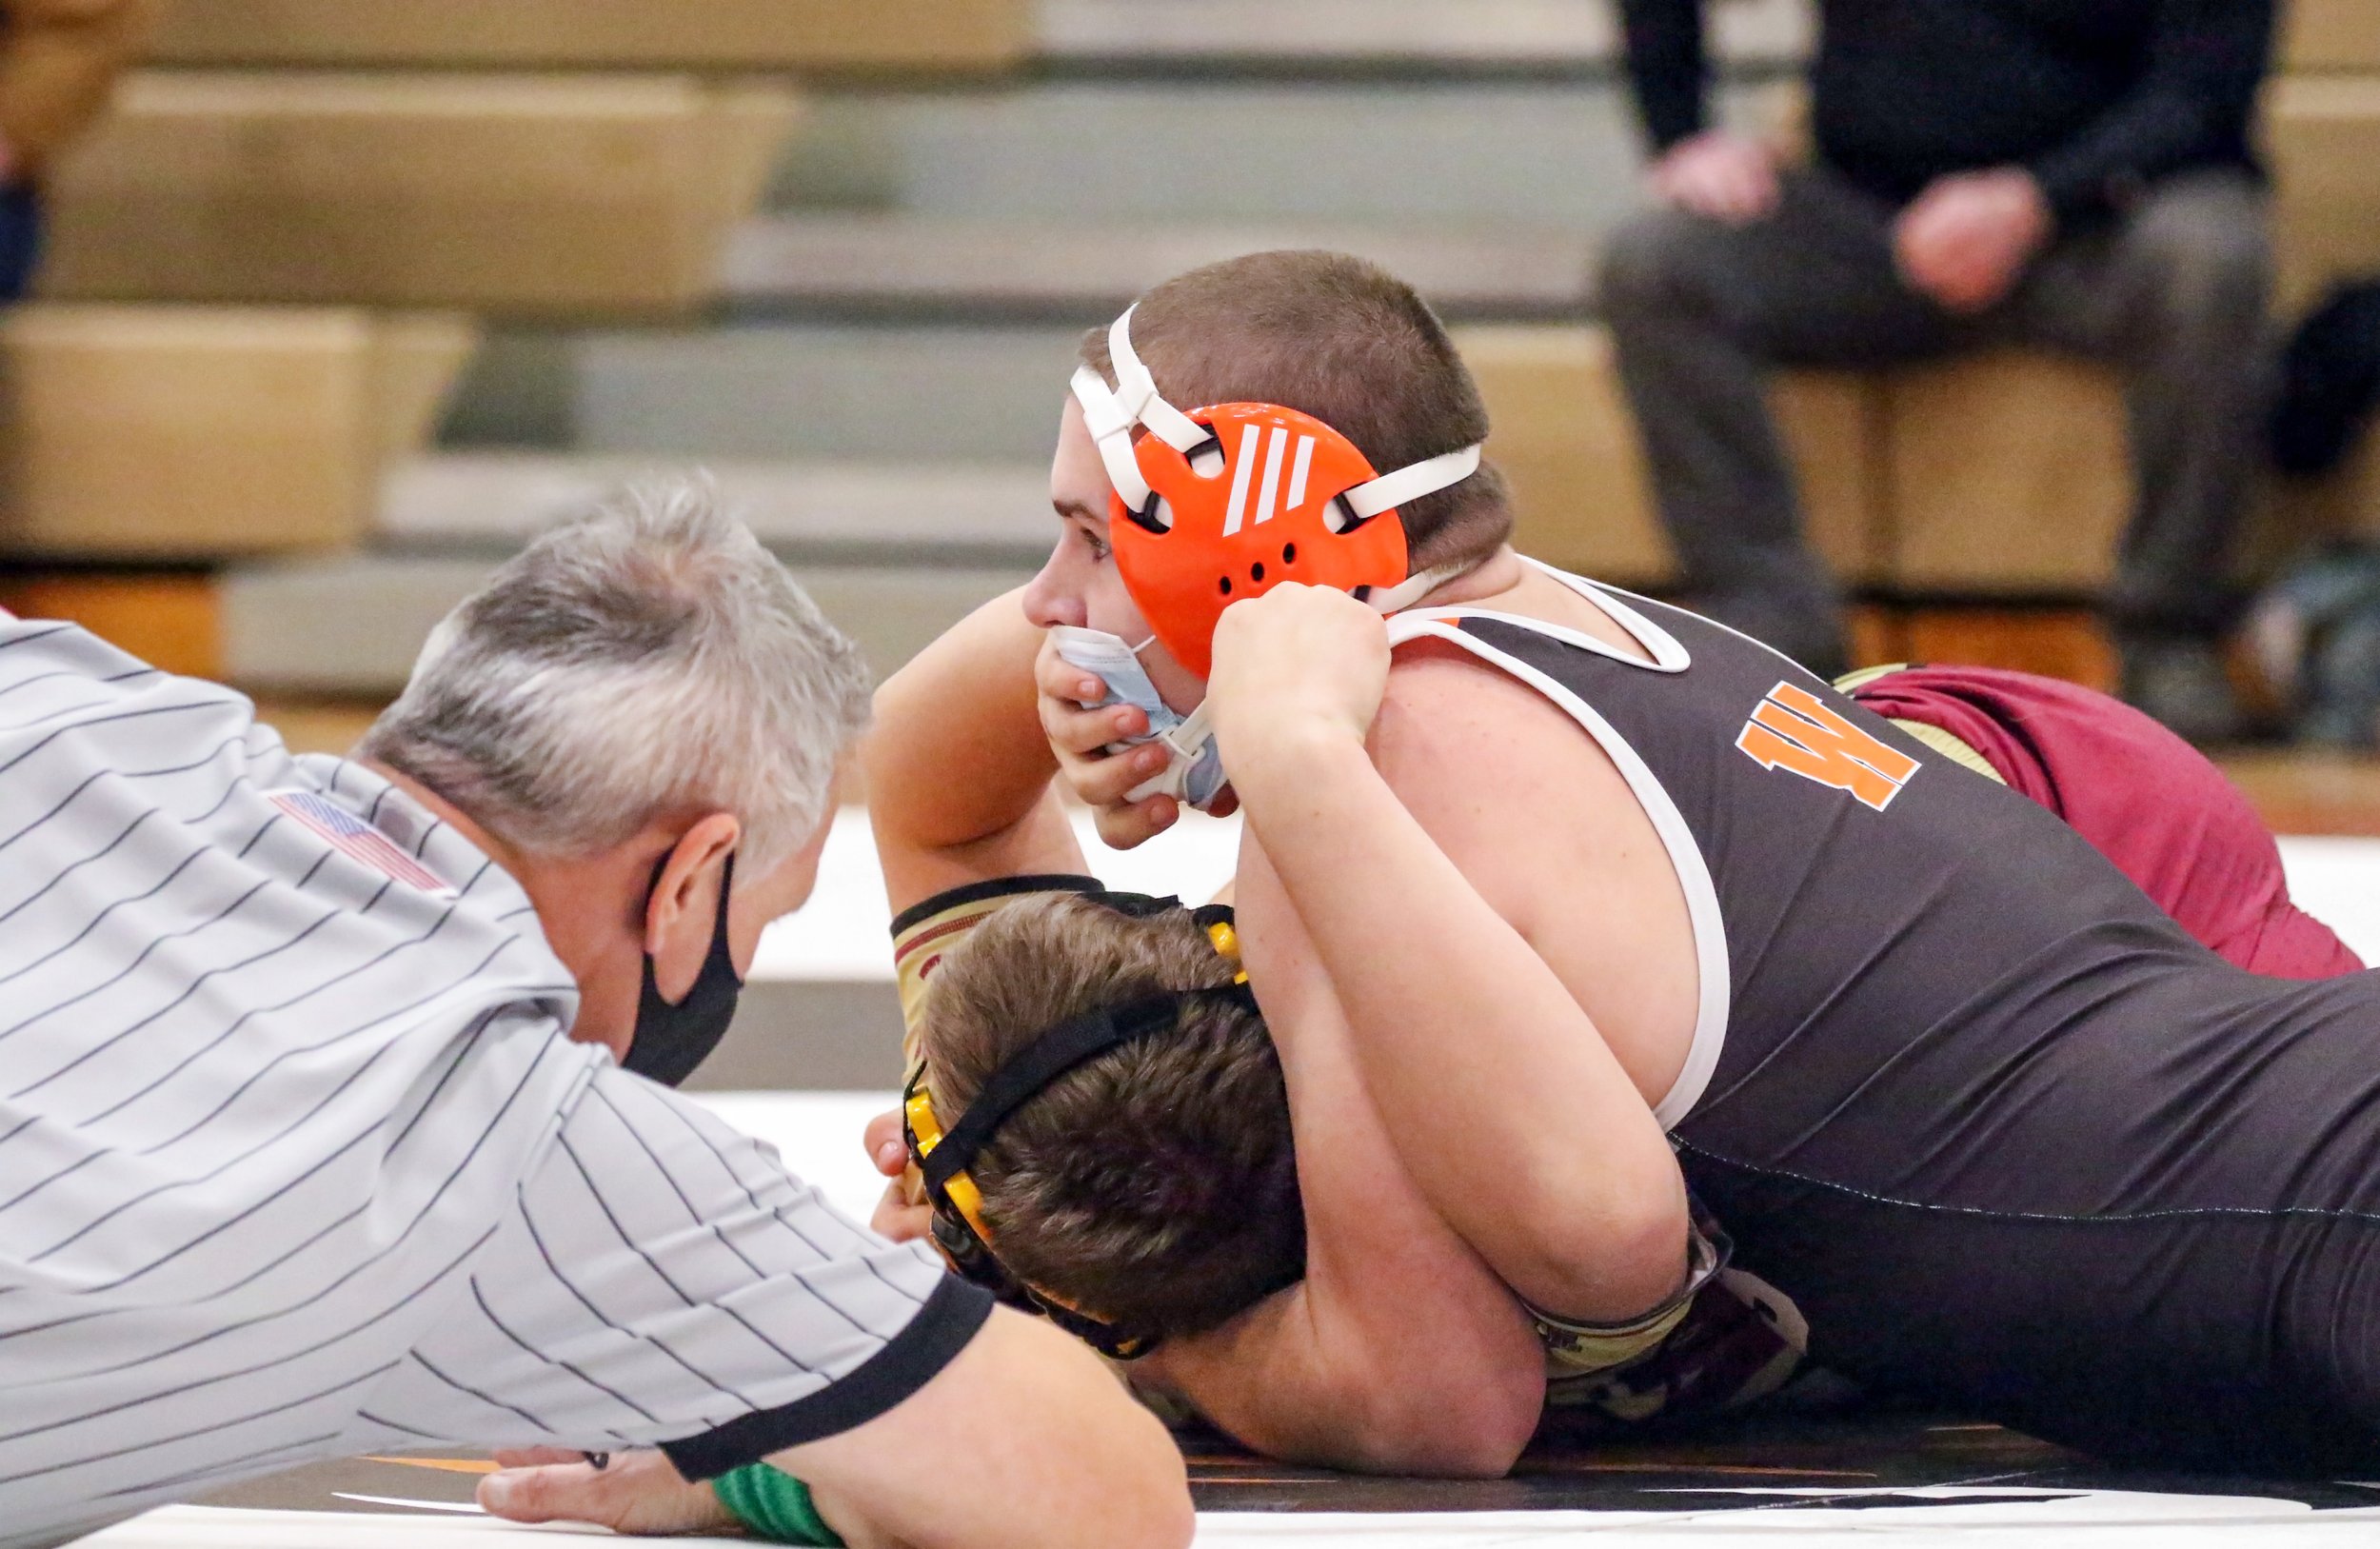  Wellsville’s Noah Black wraps up his opponent for the pin-fall victory during his bout at 215 pounds in Tuesday night’s home match against Avoca/Prattsburgh/Hammondsport. [Chris Brooks/WellsvilleSports.com] 